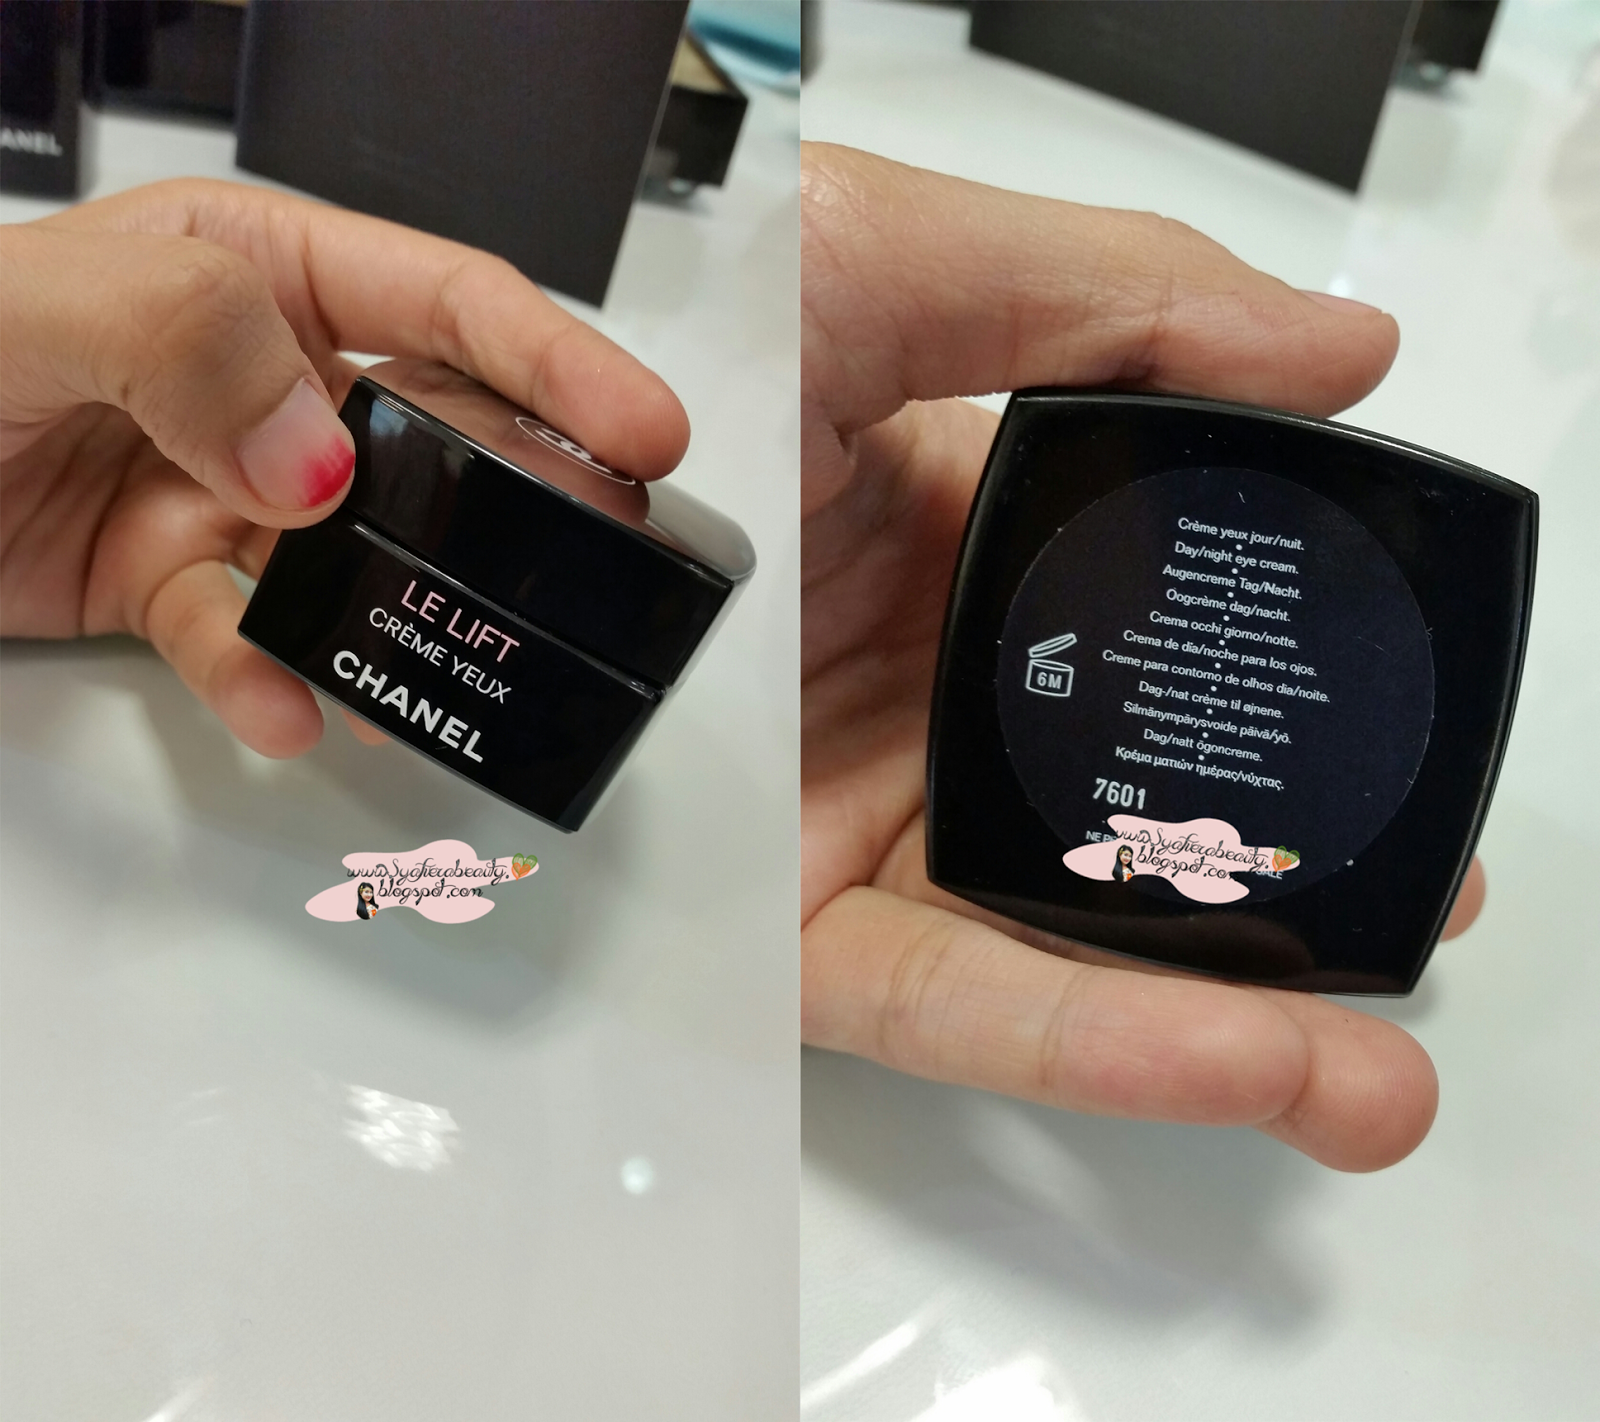 Beauty and Lifestyle Blogger: #Product Review : Chanel LE LIFT